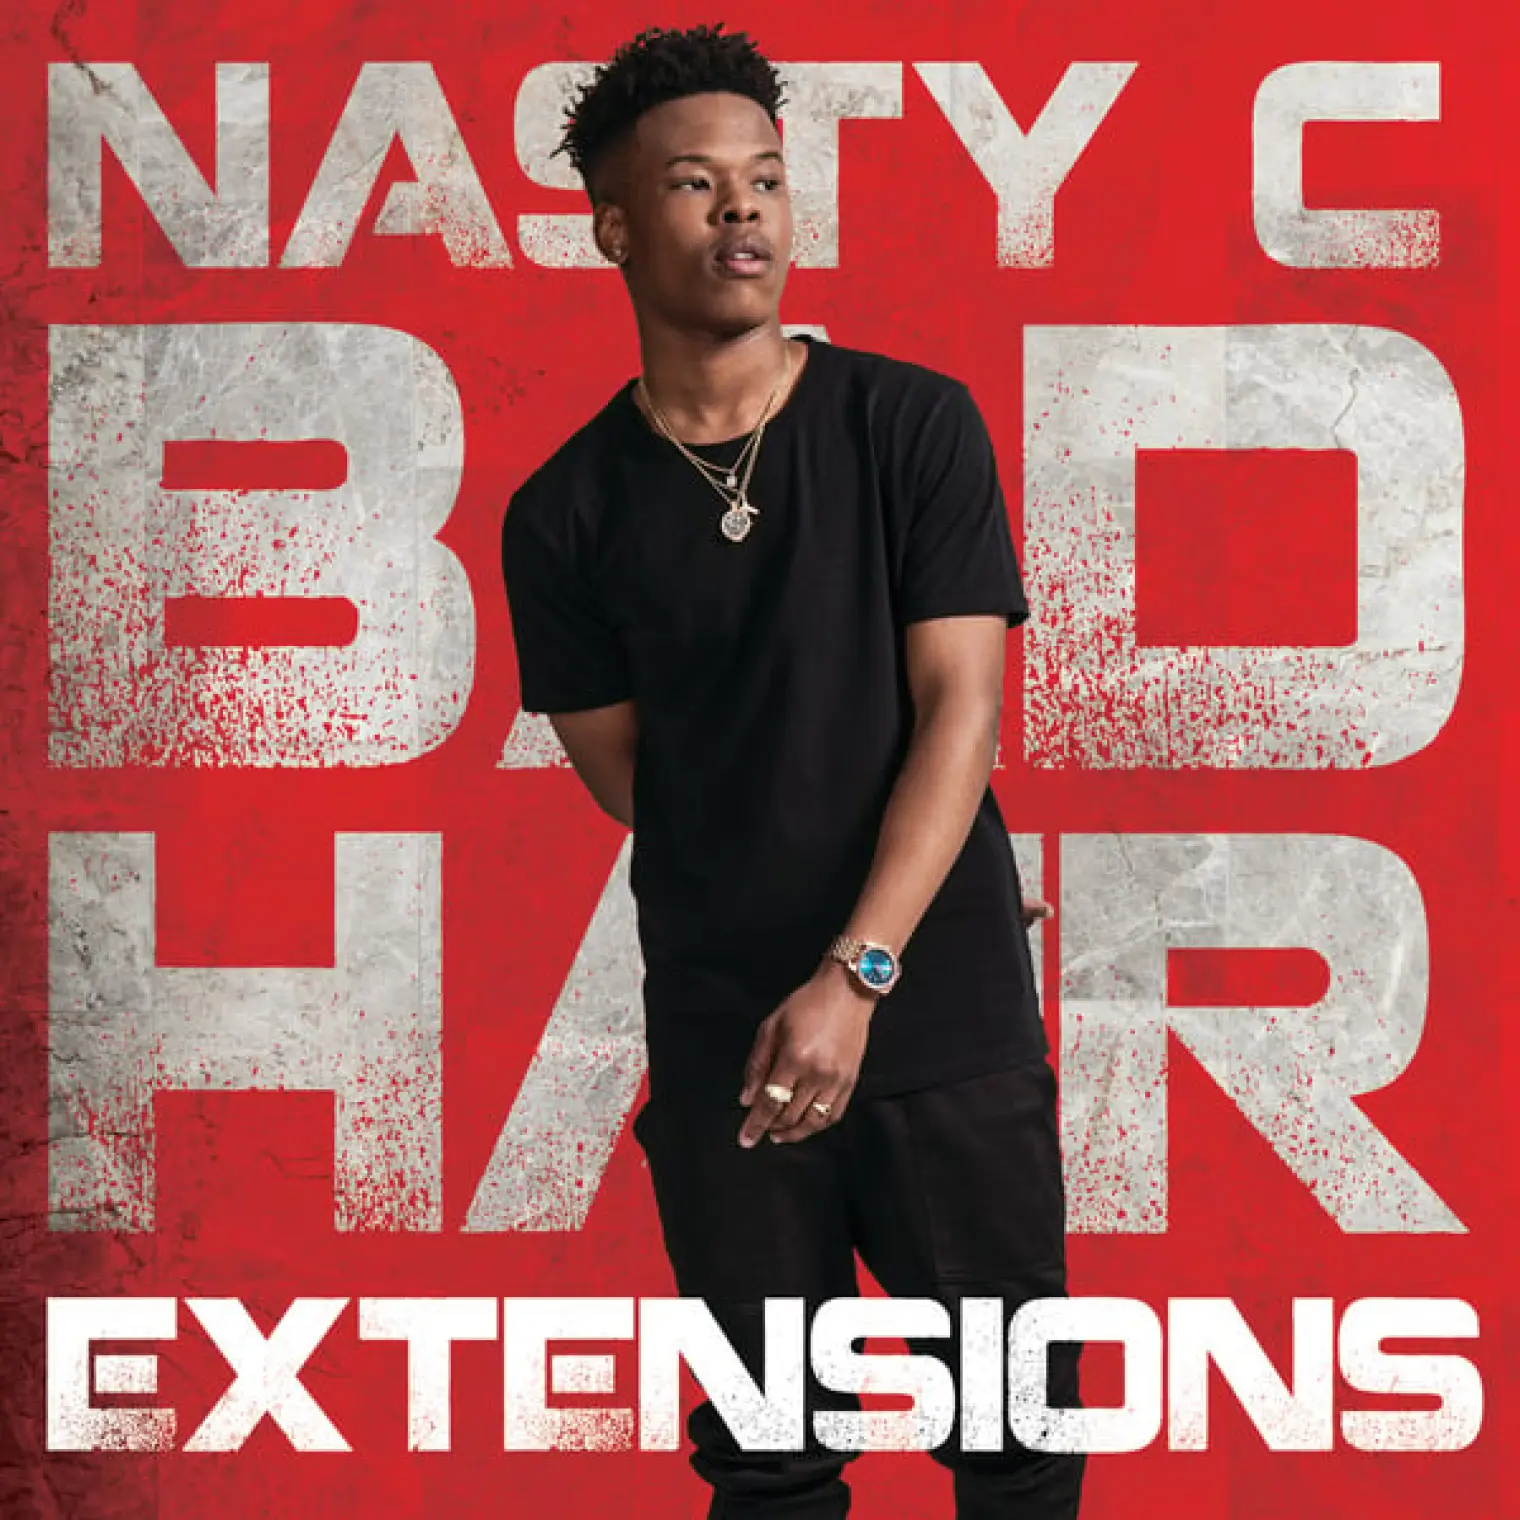 Bad Hair Extensions -  Nasty C 